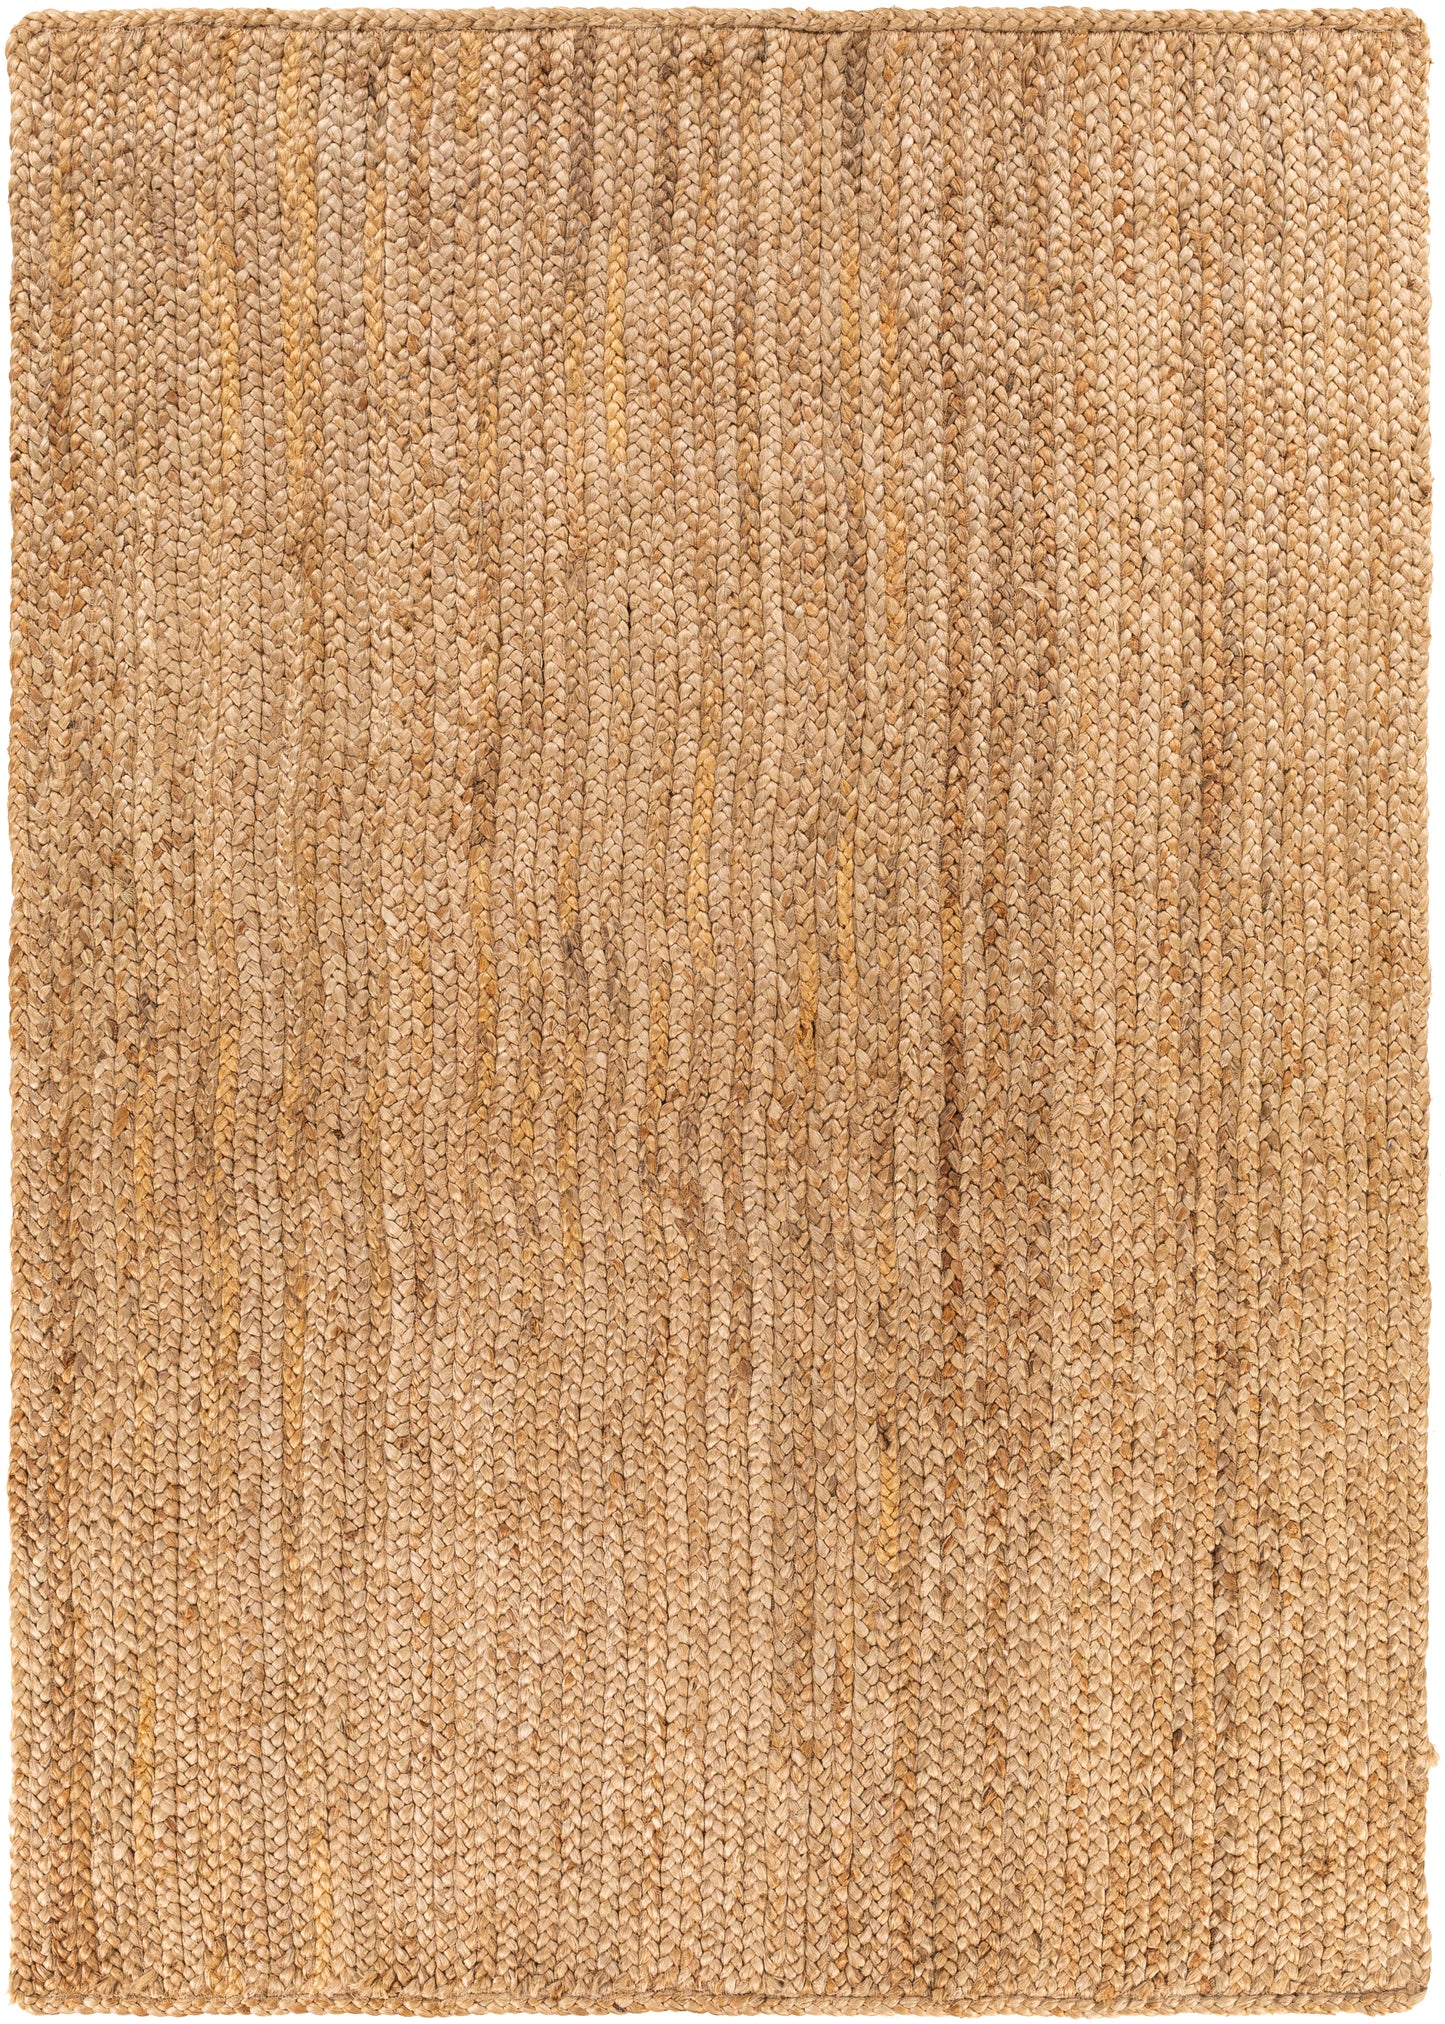 Natural Braids 27941 Hand Woven Jute Indoor Area Rug by Surya Rugs